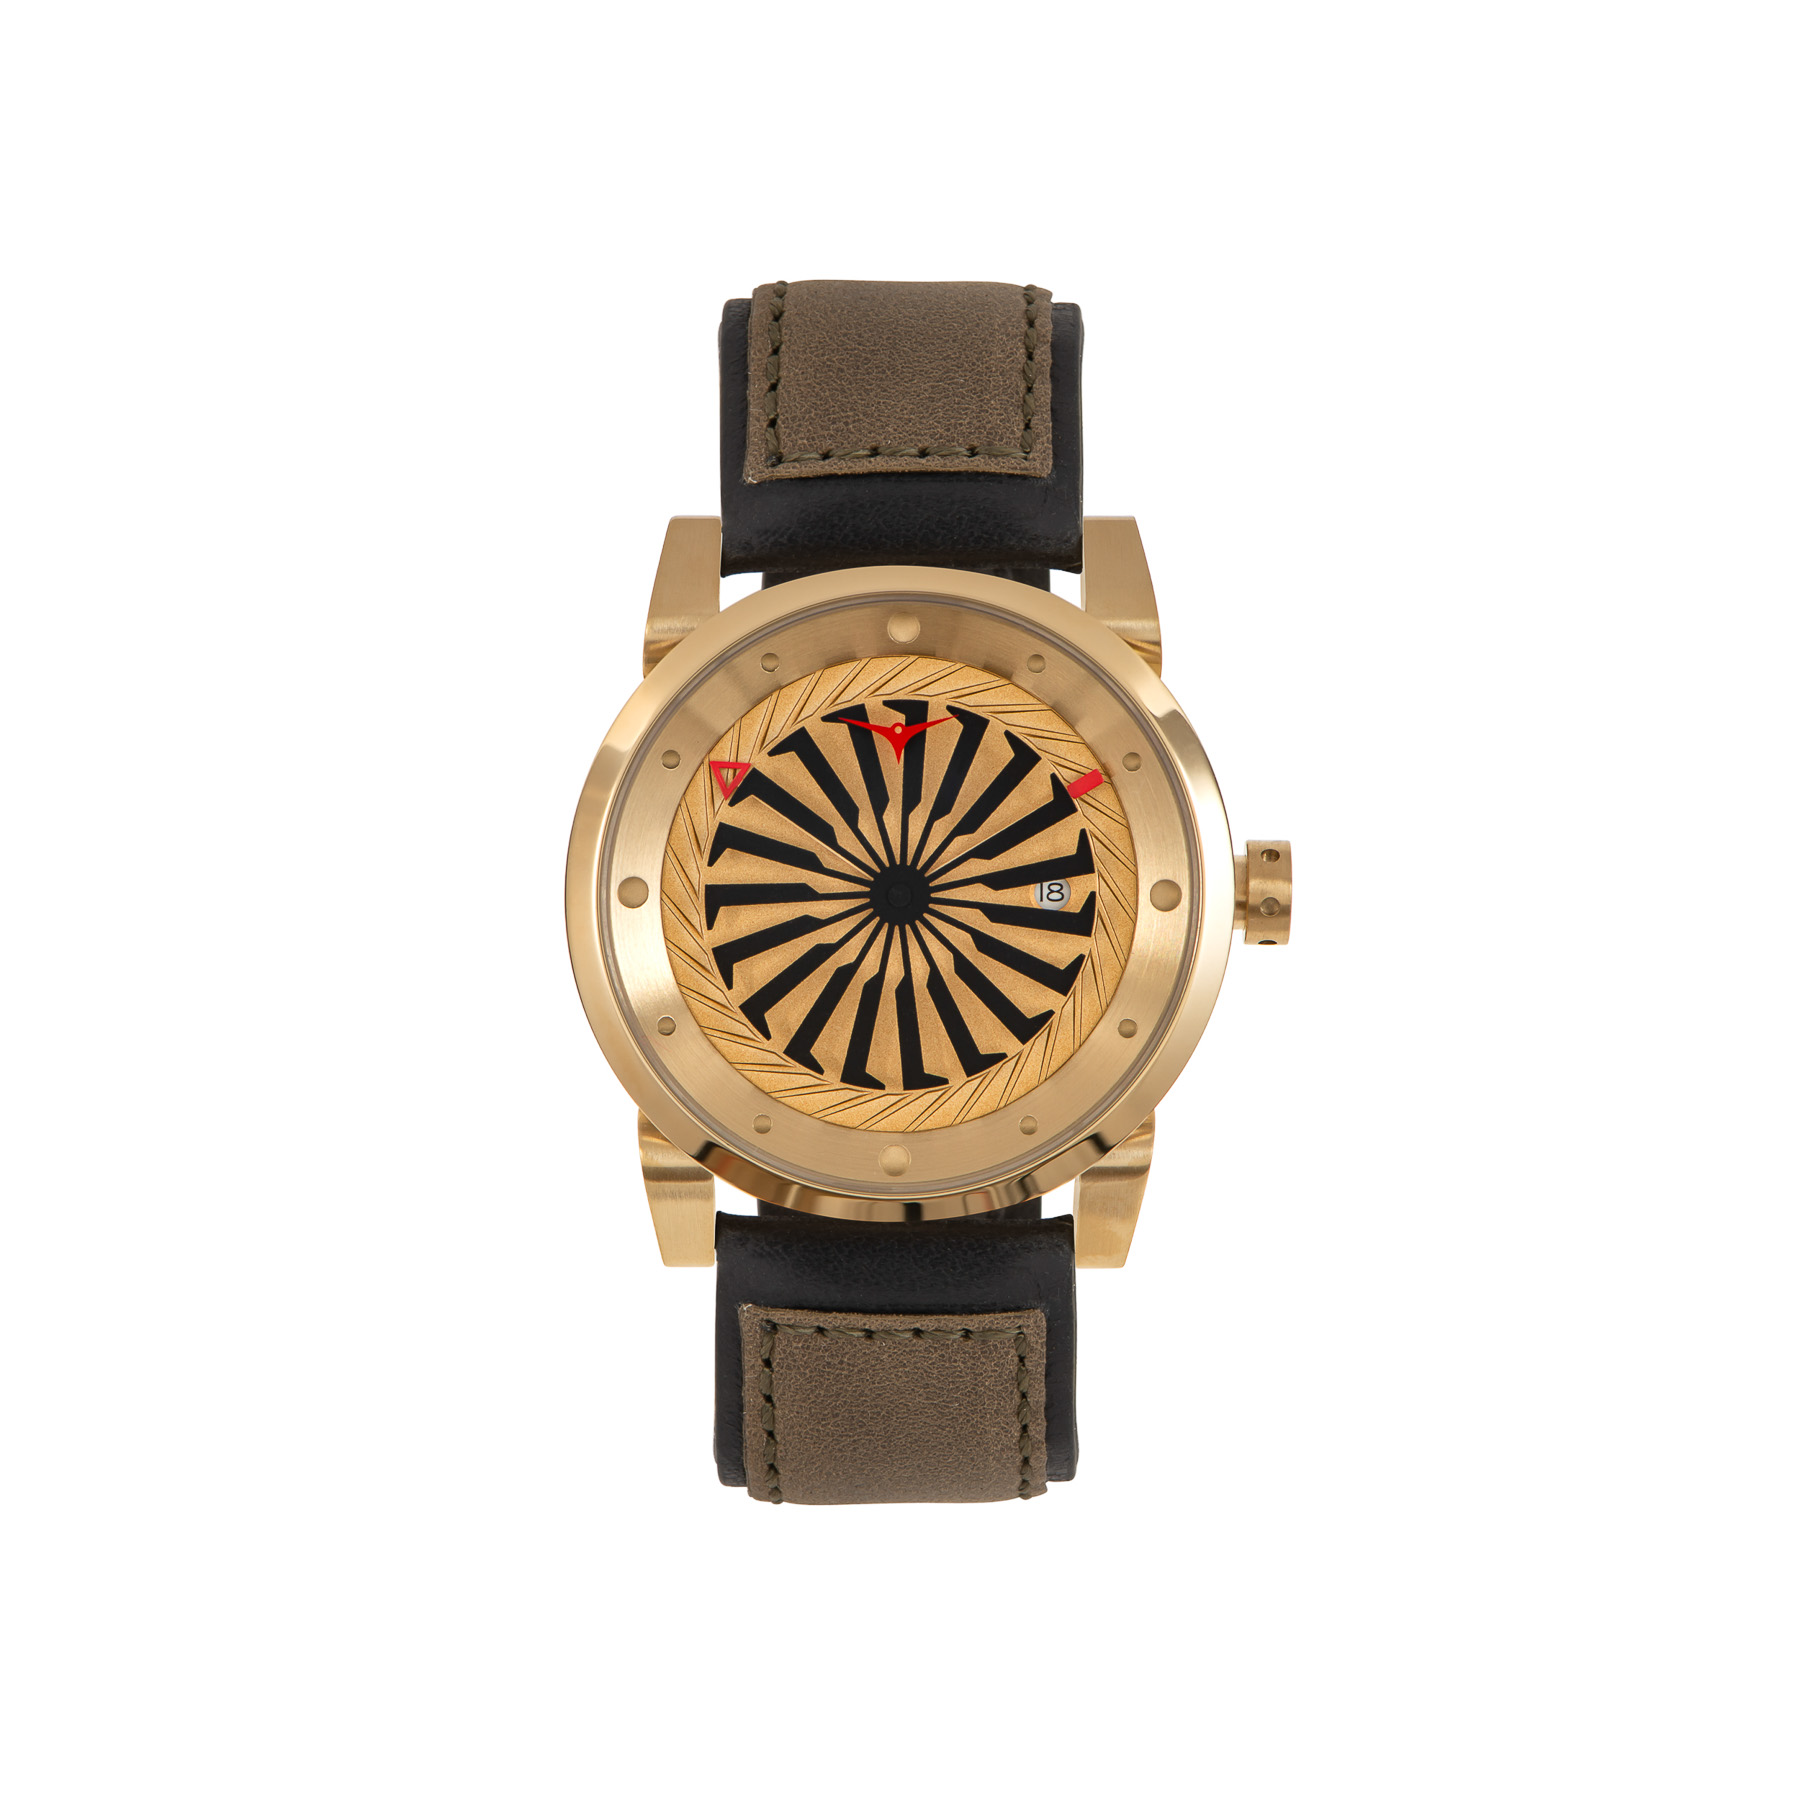 luxury goods gold yellow and red watch its all about great photography done by Expozme Photography a Los Angeles Based Product Photography eCommerce Photography Studio